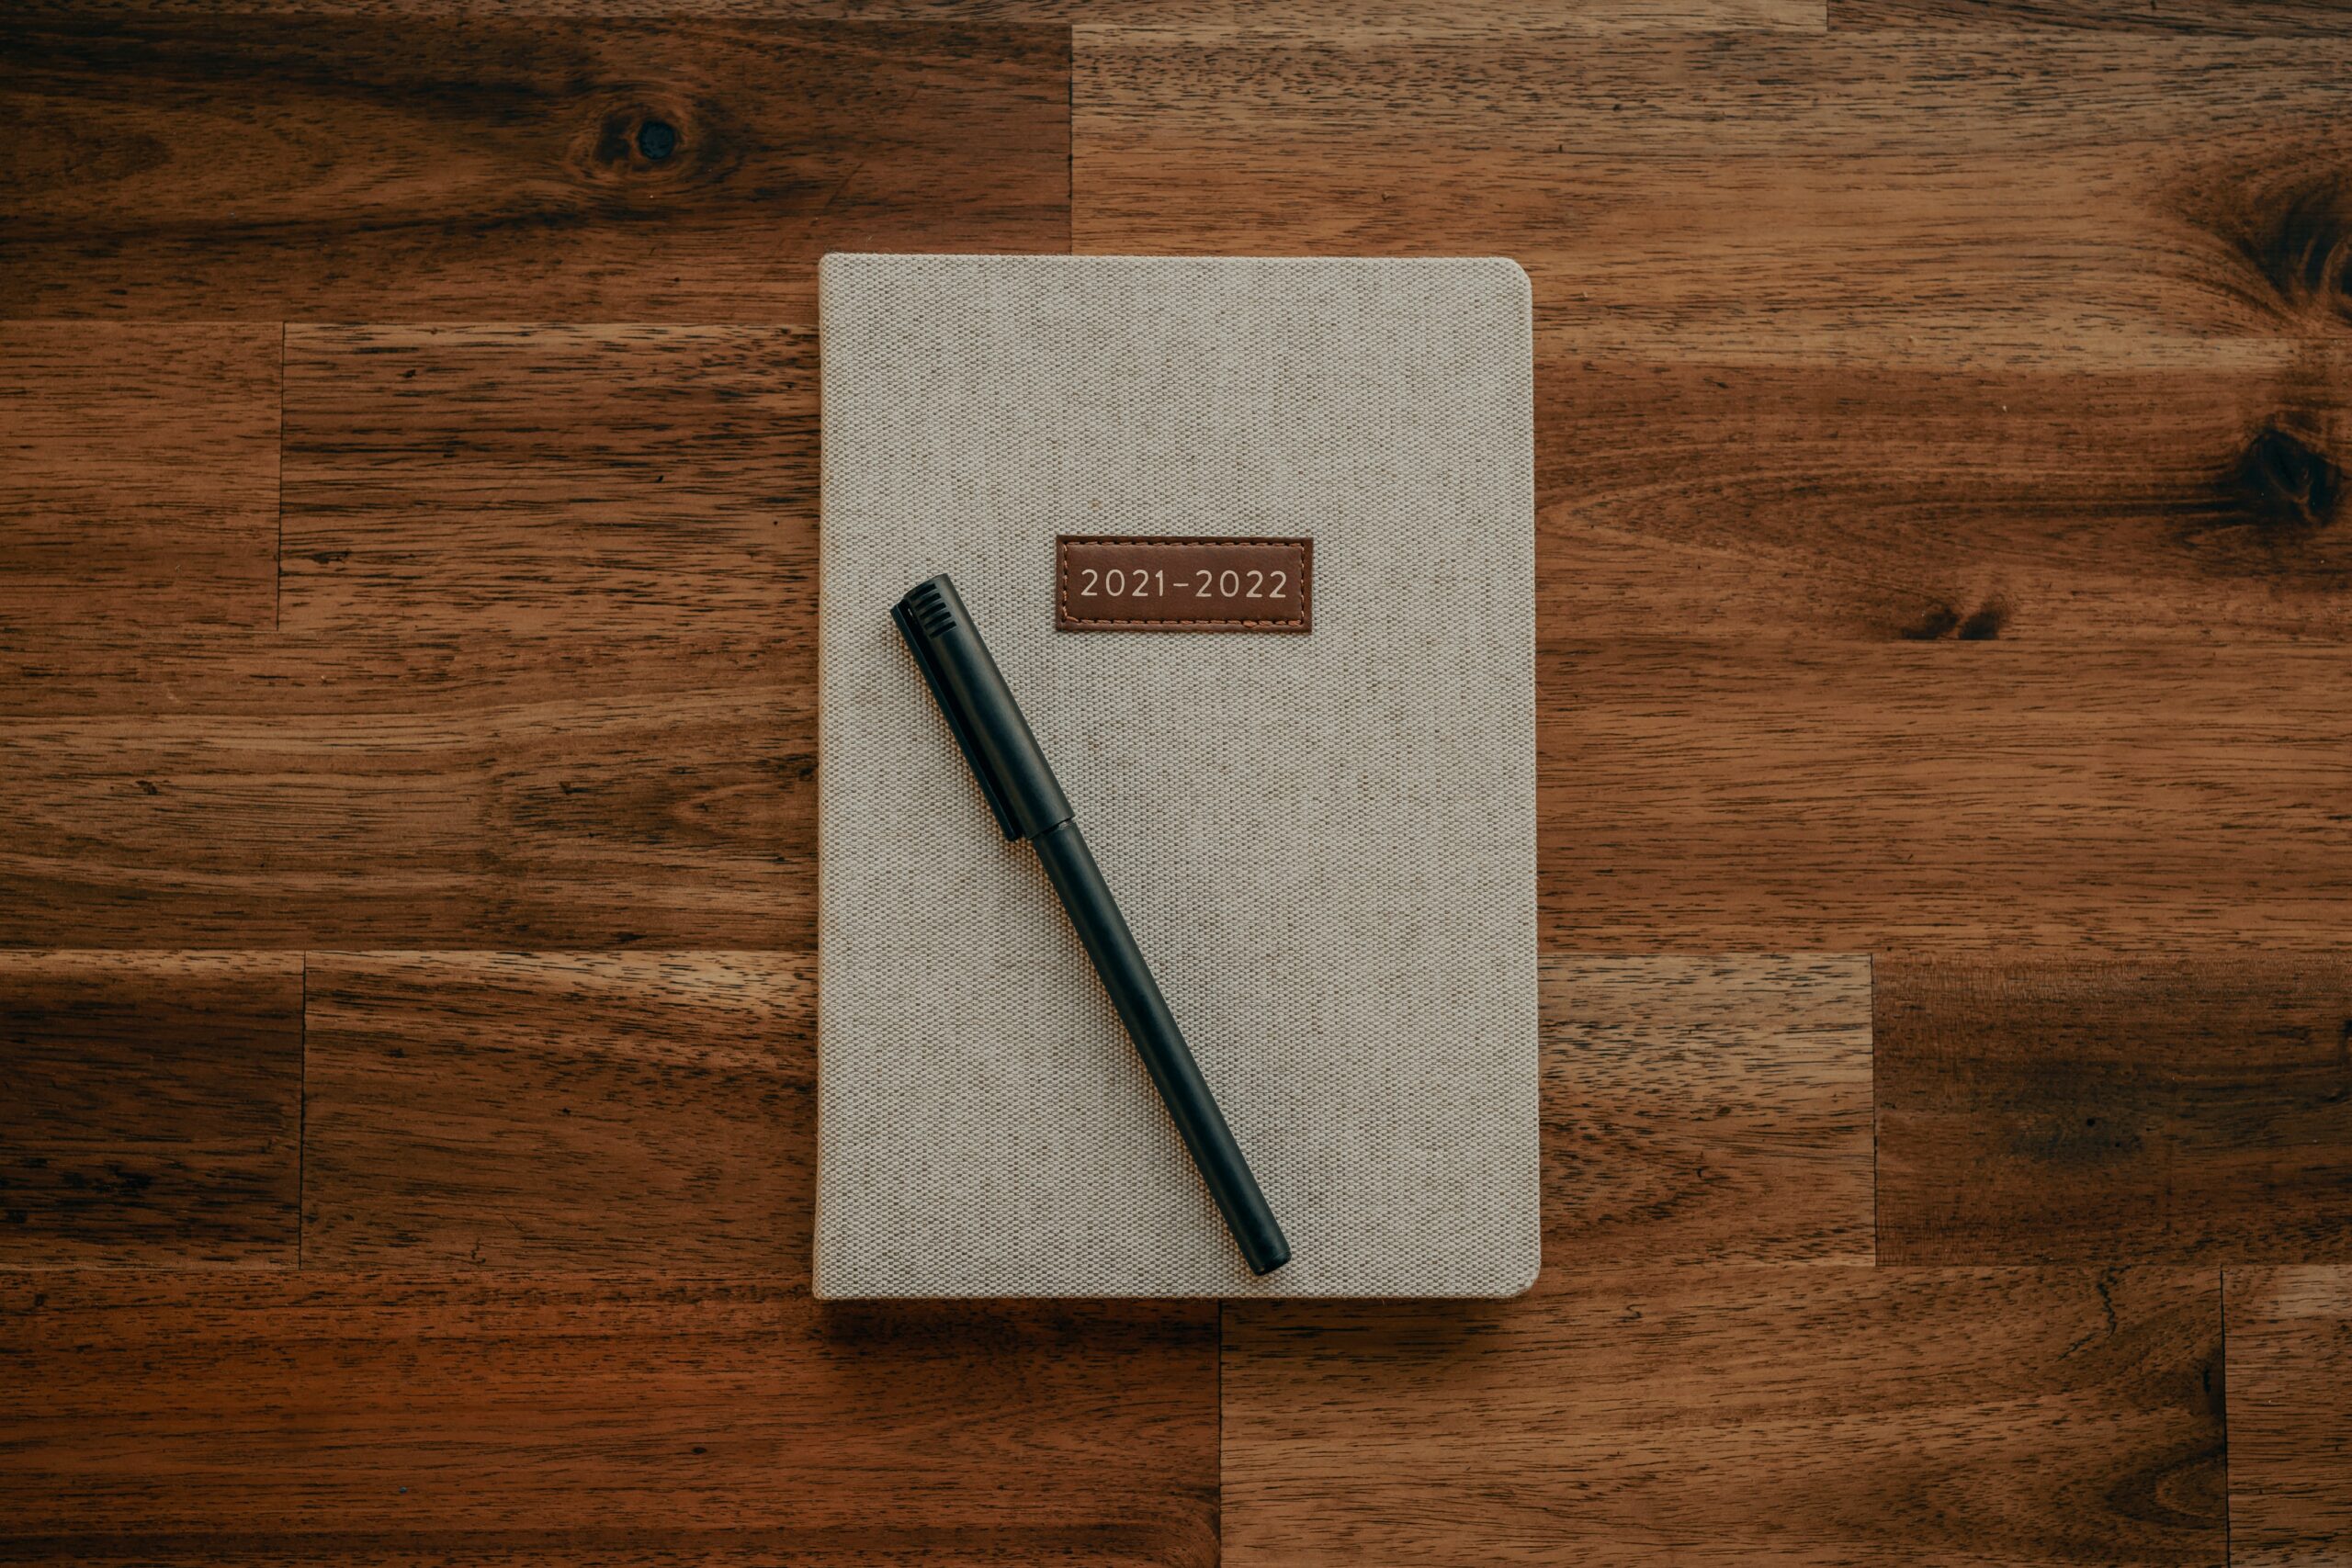 Image is of a beige 2022 day planner with a black pen on top. The planner sits on a dark brown wooden table. This image represents resolutions and habit formation in 2022.